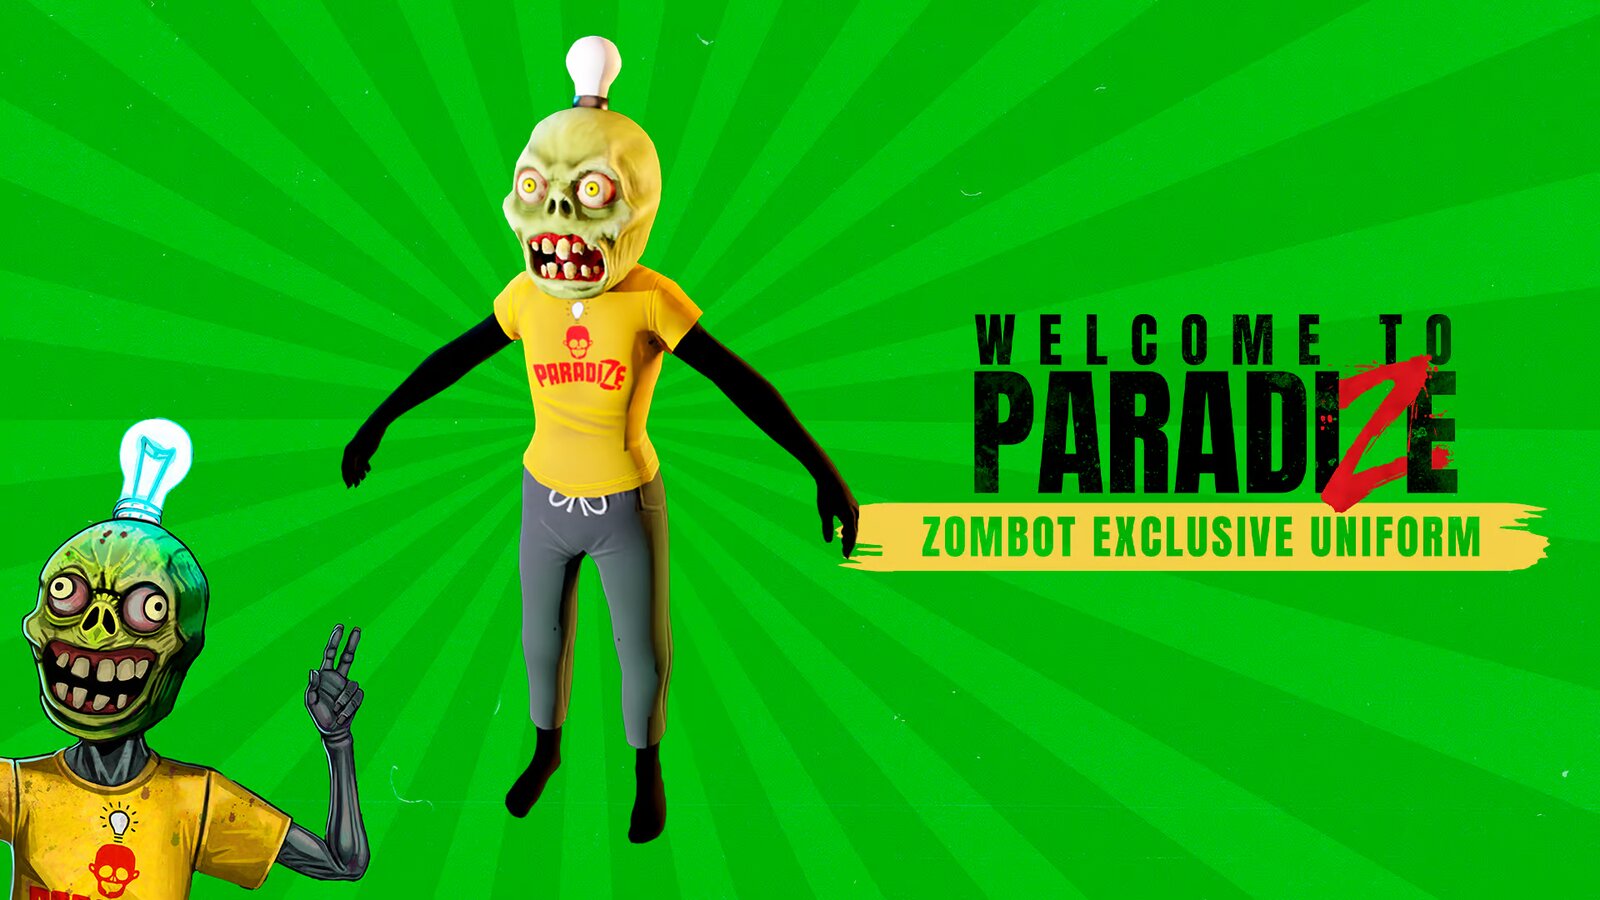 Welcome to ParadiZe - ParadiZe Zombot Skin